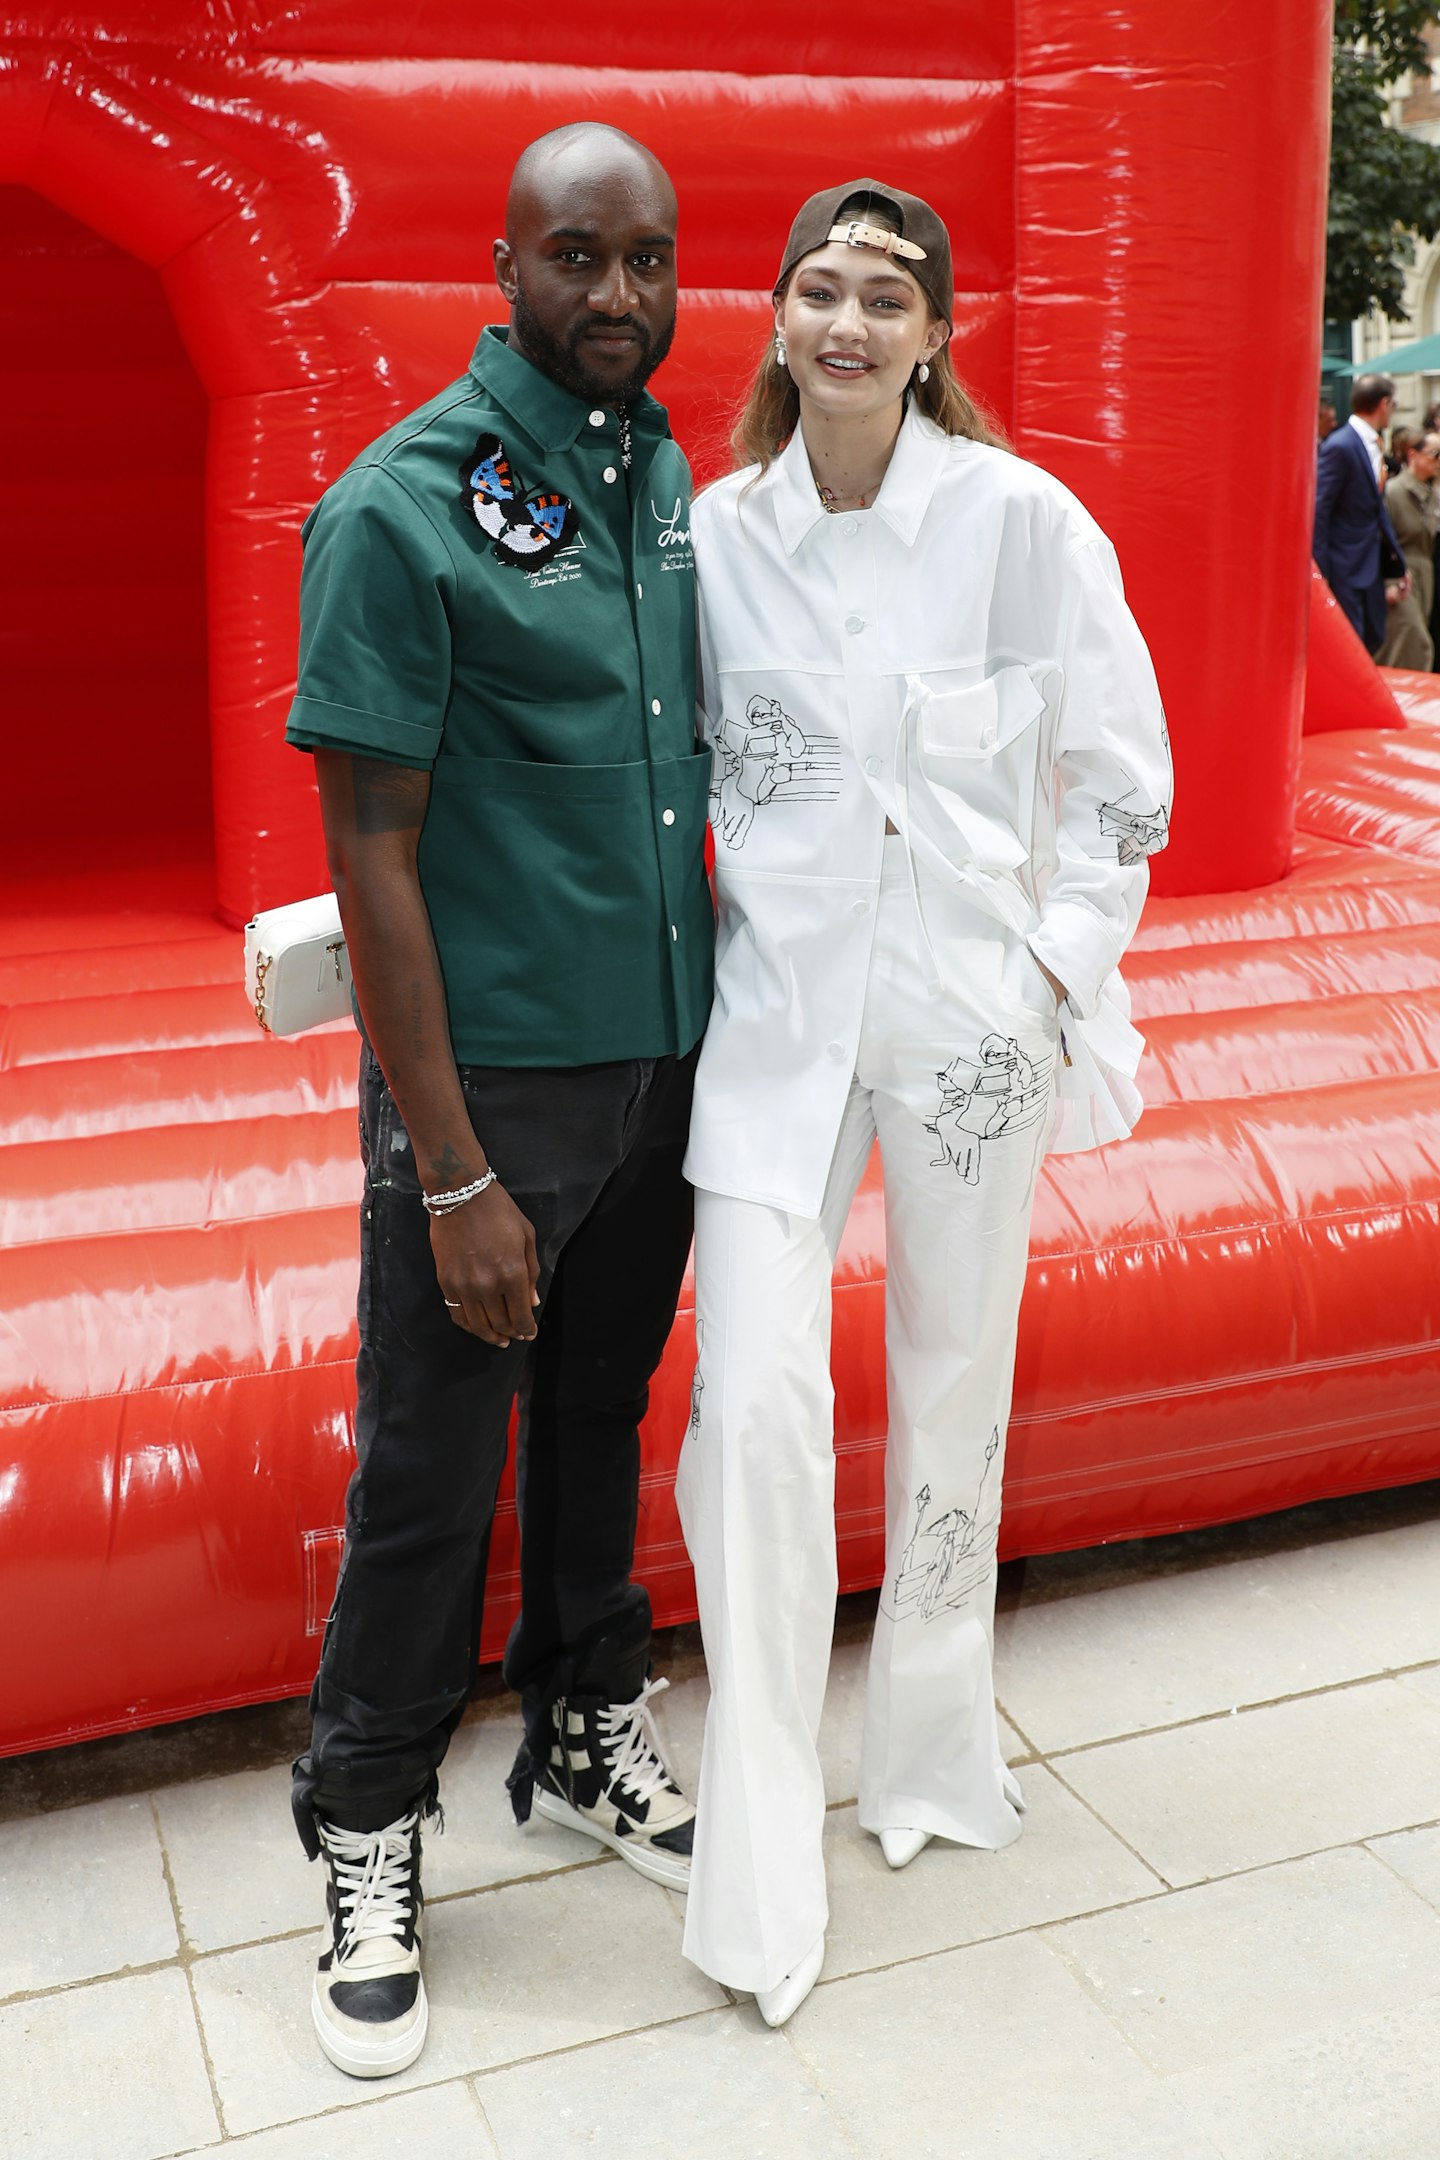 10 of Virgil Abloh's best celebrity fashion moments: from Rihanna at his  2019 Louis Vuitton debut to Hailey Bieber's oversized Off-White trench coat  and Kylie Jenner's baby bump reveal